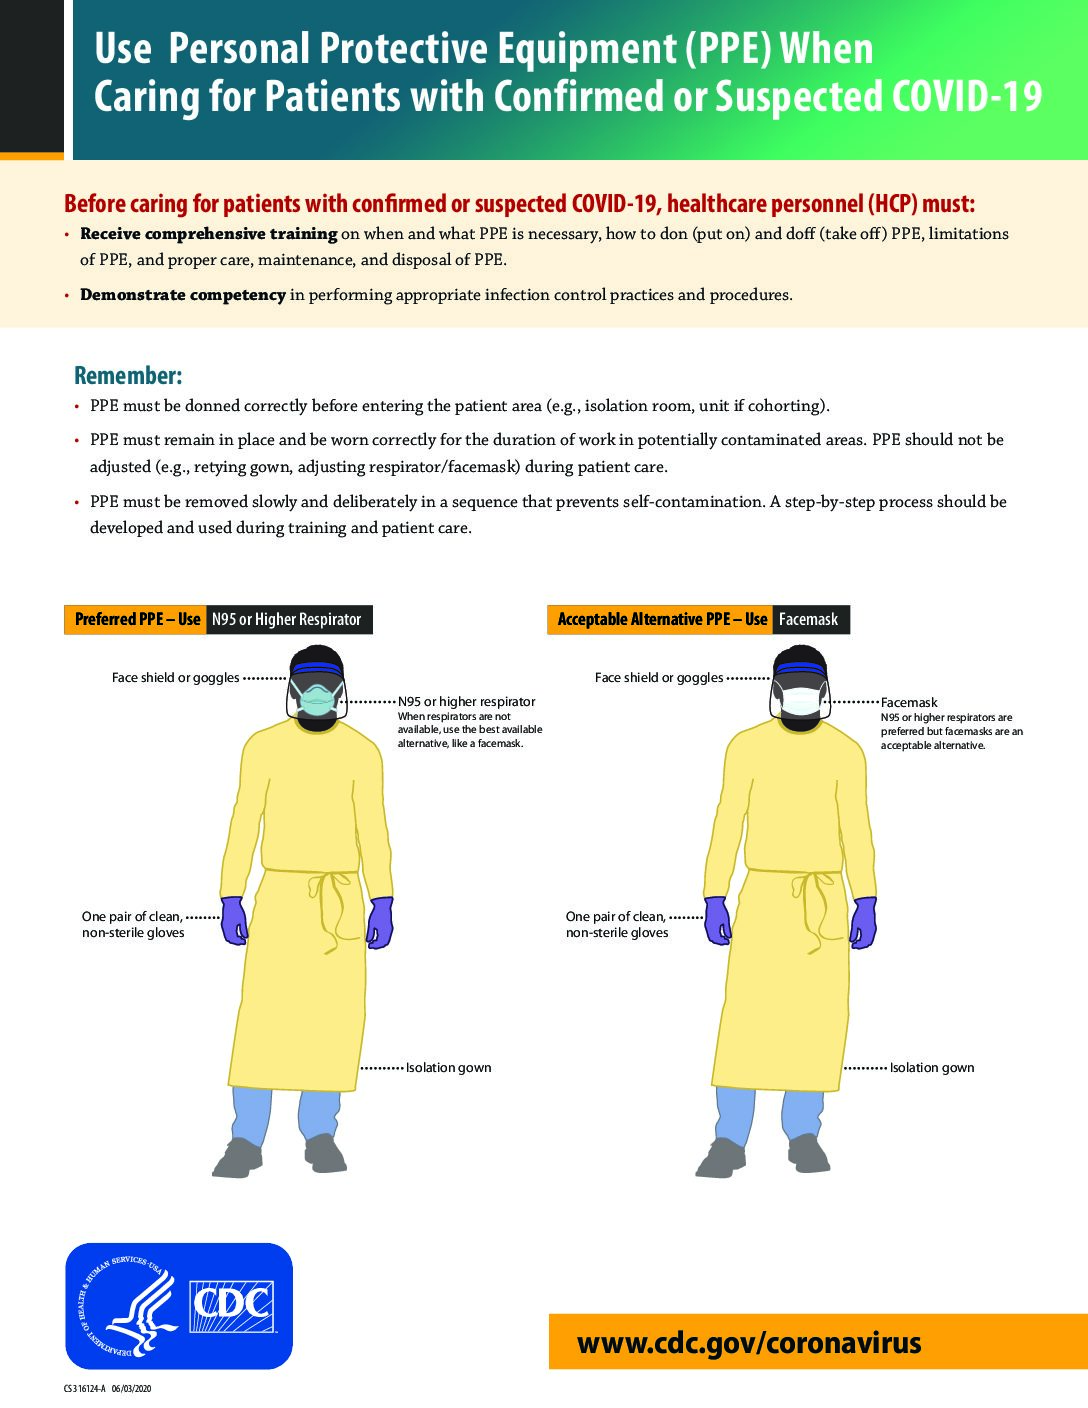 Use Personal Protective Equipment (PPE) When Caring for Patients with Confirmed or Suspected COVID-19